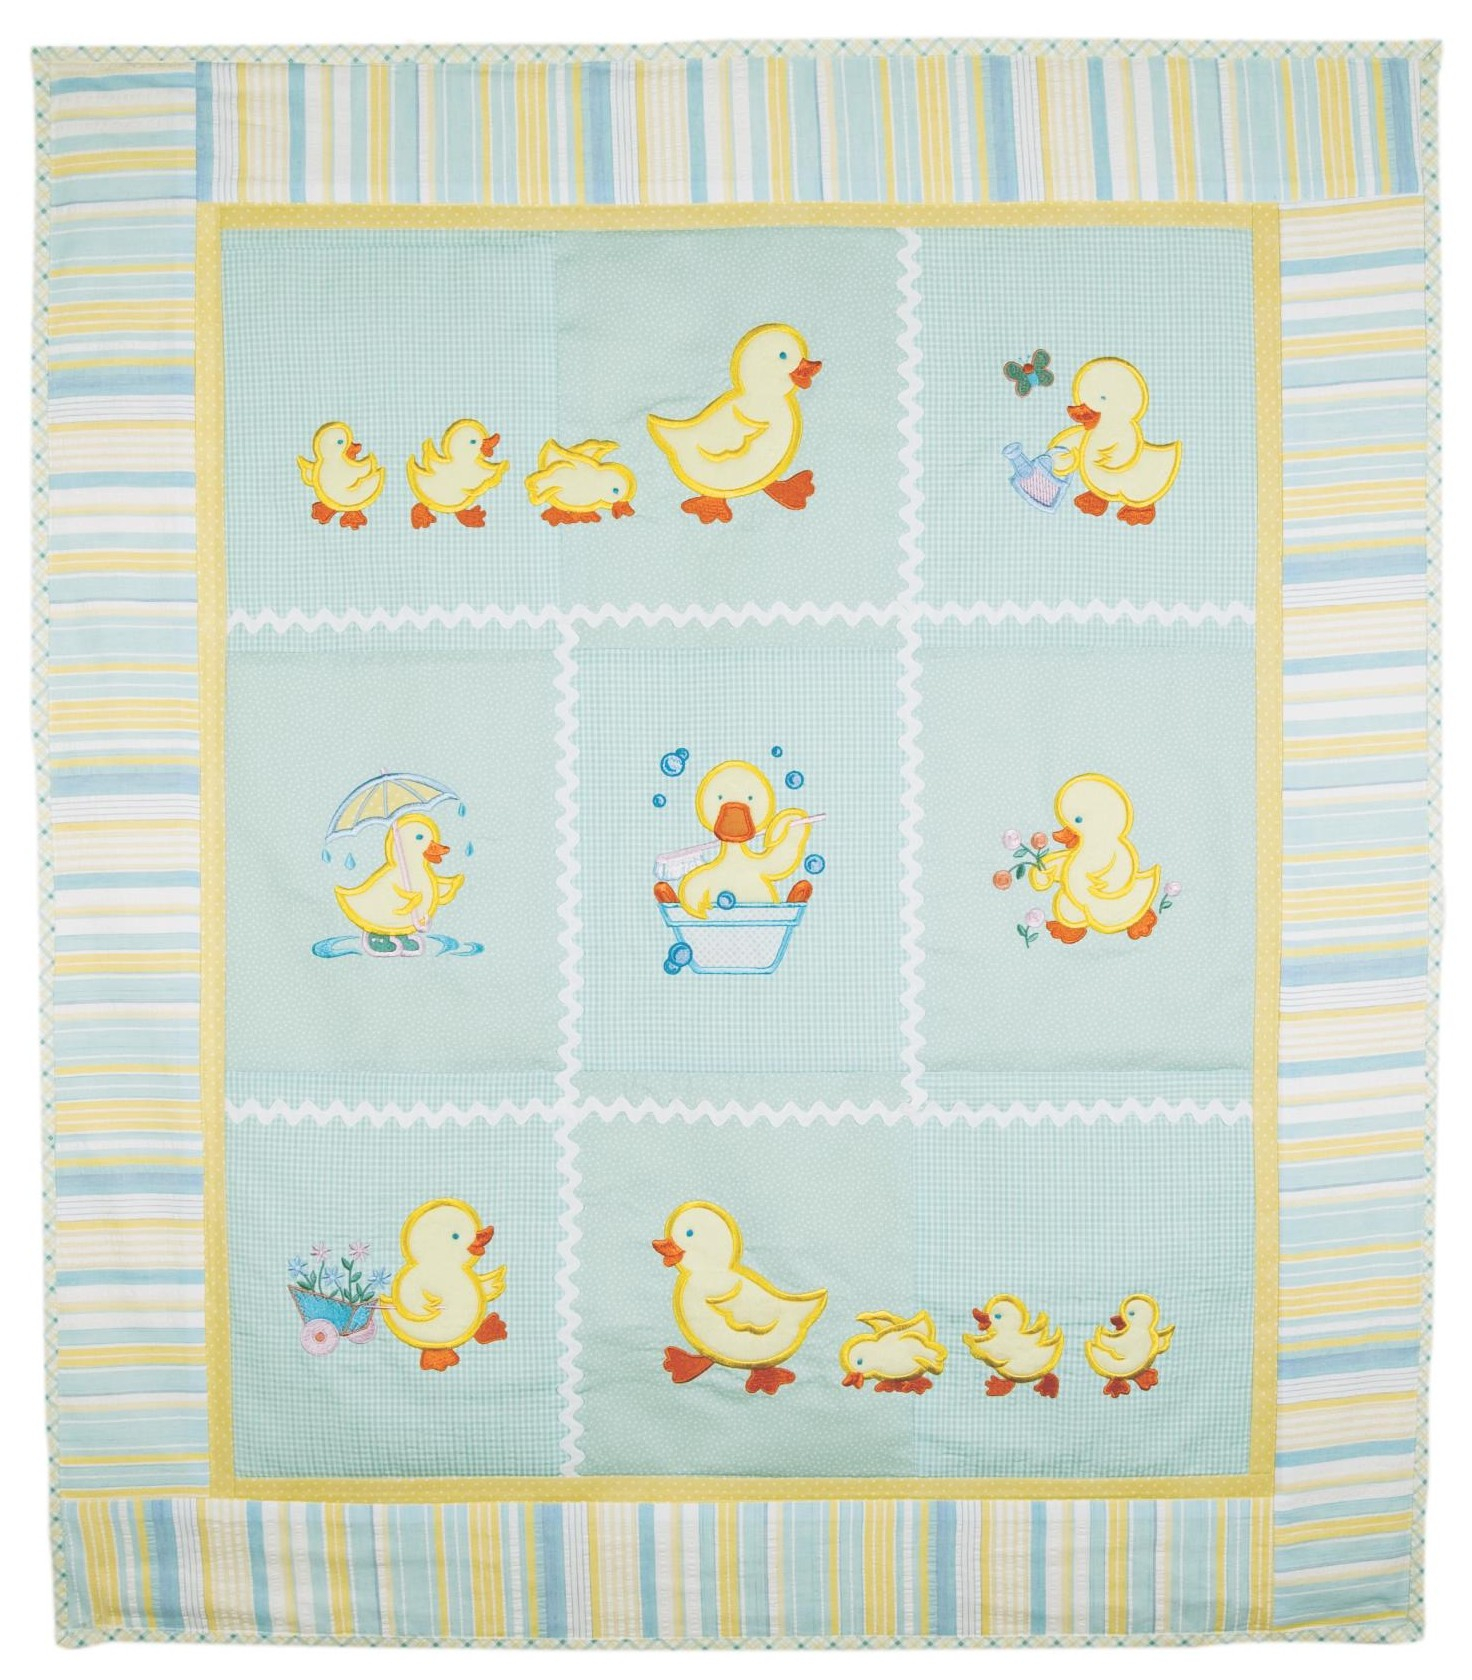 Hand Embroidery Patterns For Baby Quilts Ba Ducks Embroidery Design Collection Anita Goodesign